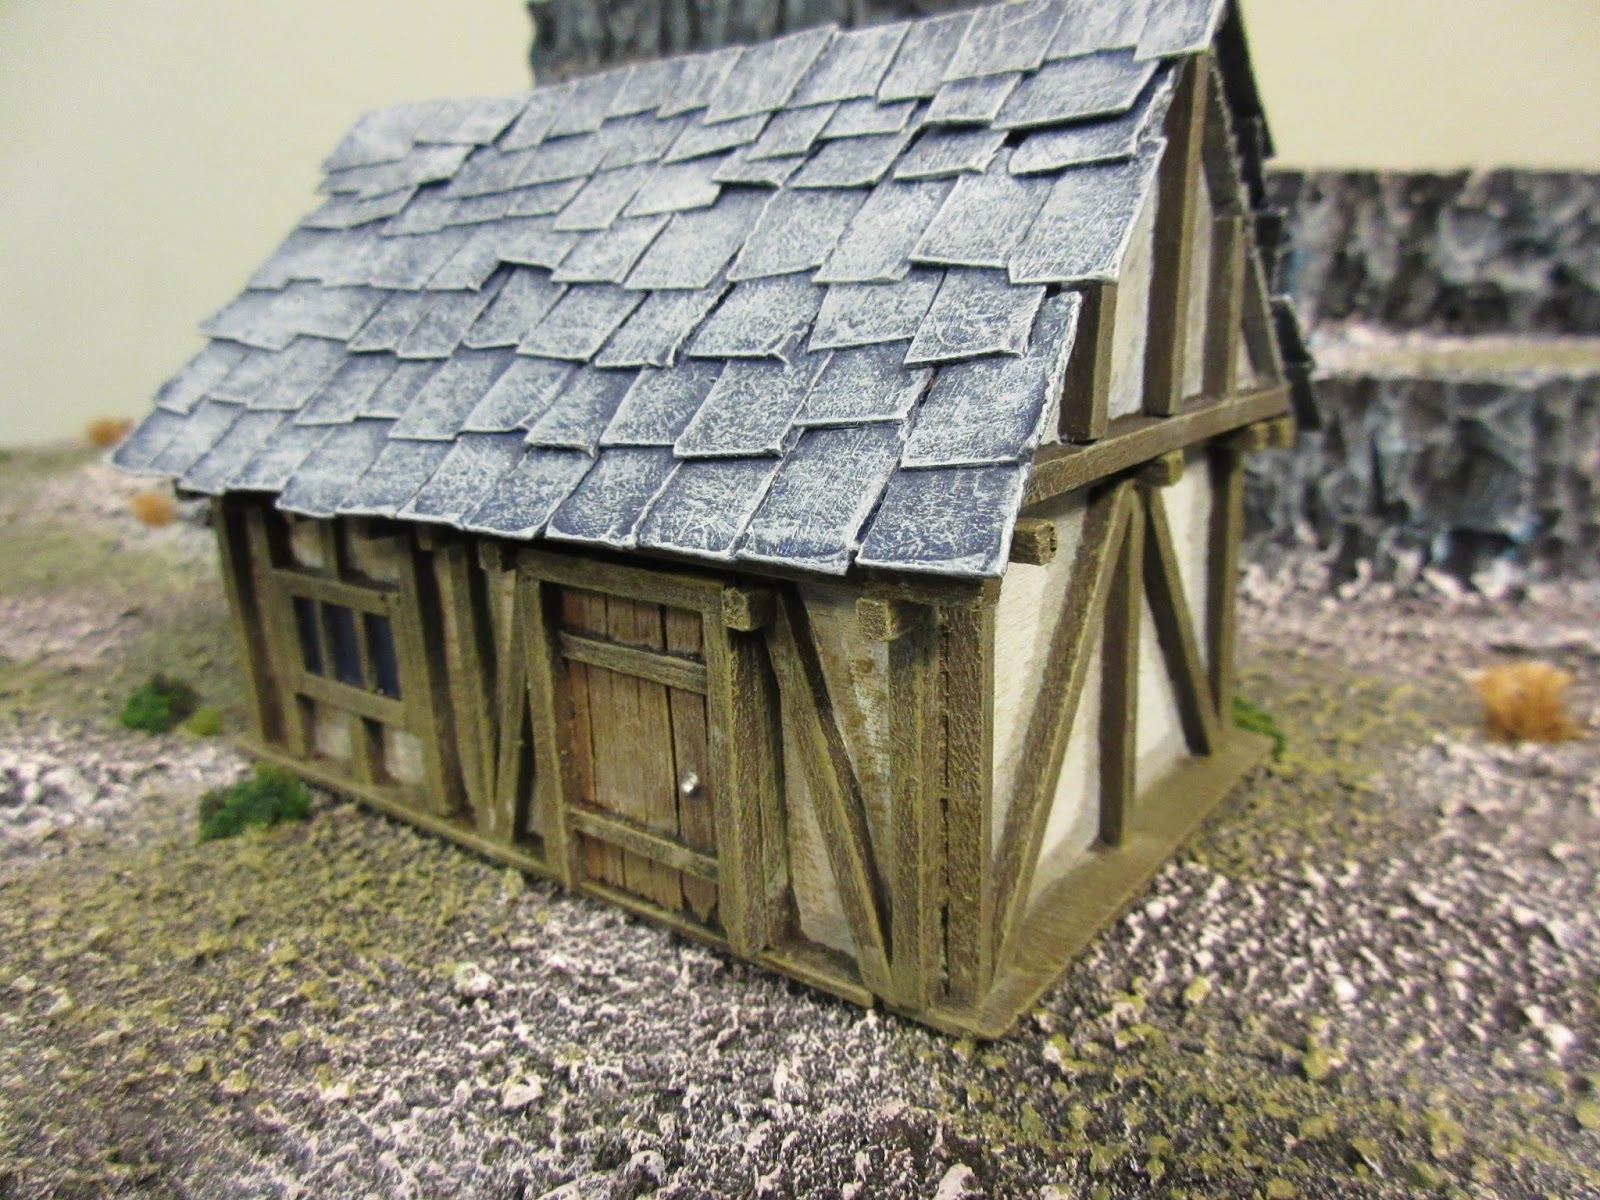 Mars Miniatures Cabin In The Woods Making A Balsa Wood 